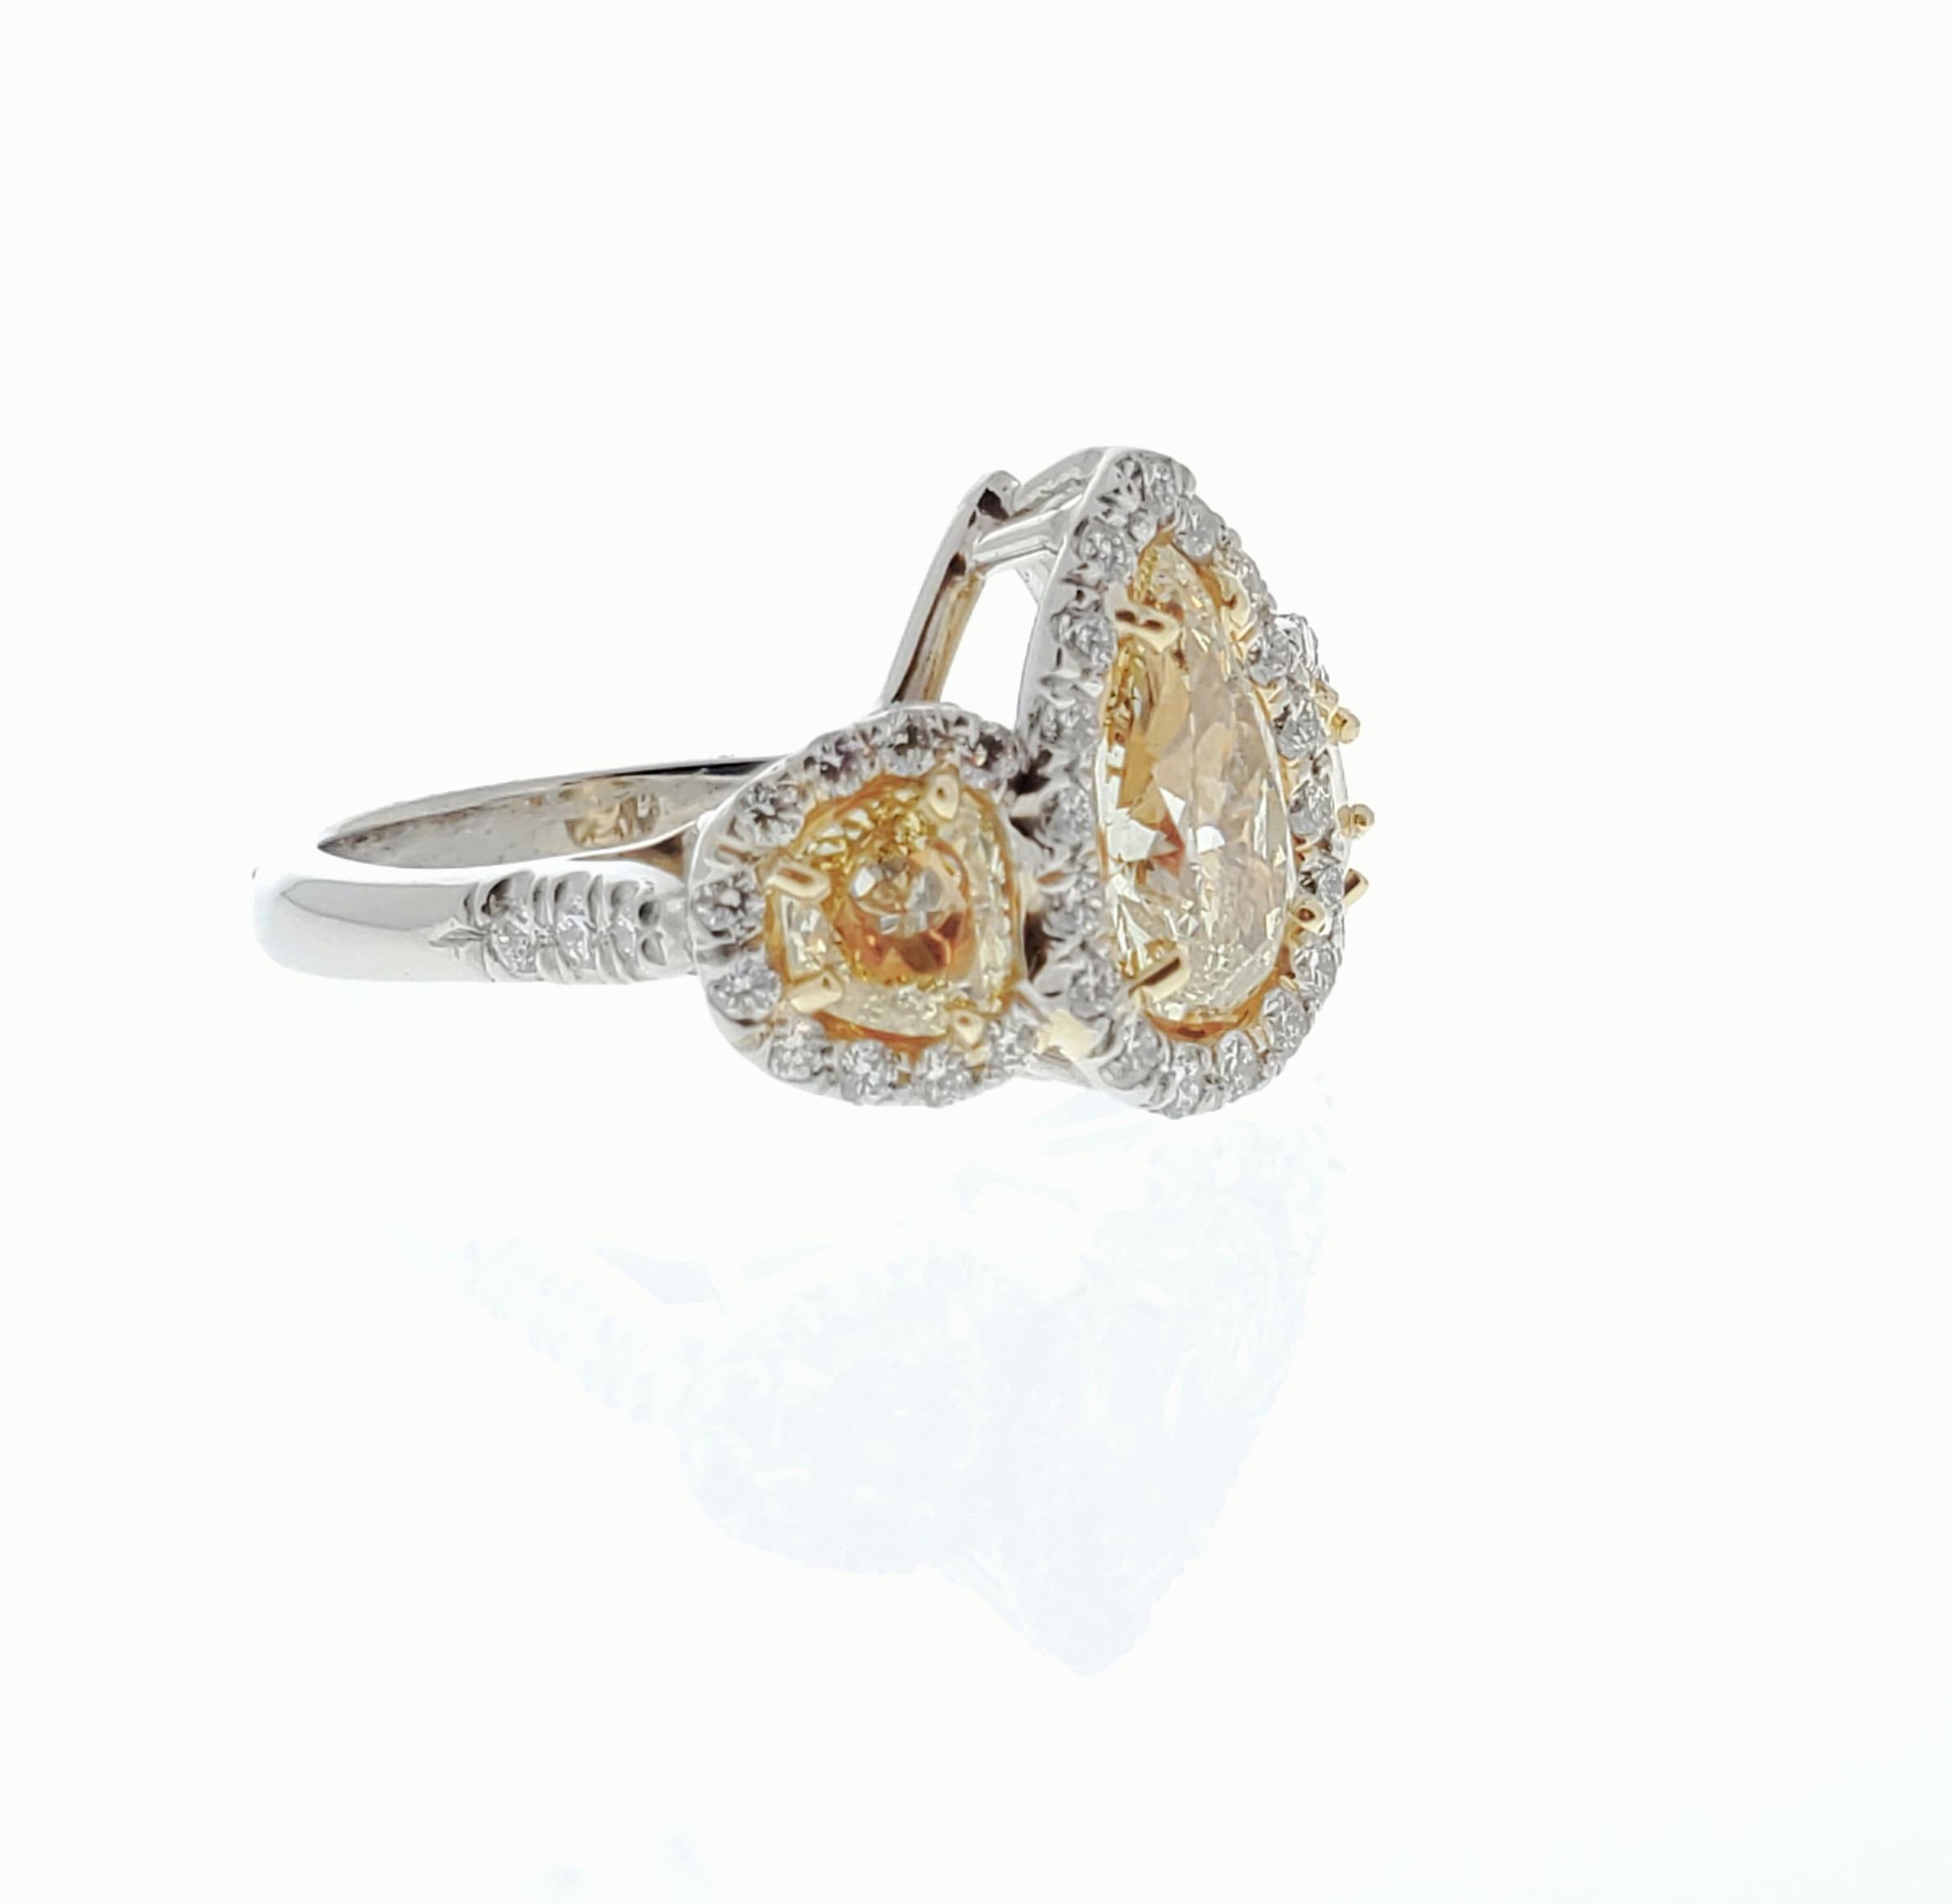 This show-stopping engagement anniversary ring is finely crafted in brightly polished platinum and features a 1.53 carat pear shaped fancy yellow diamond that is accompanied by a GIA certification upon purchase. A total of 0.75 carat fancy yellow